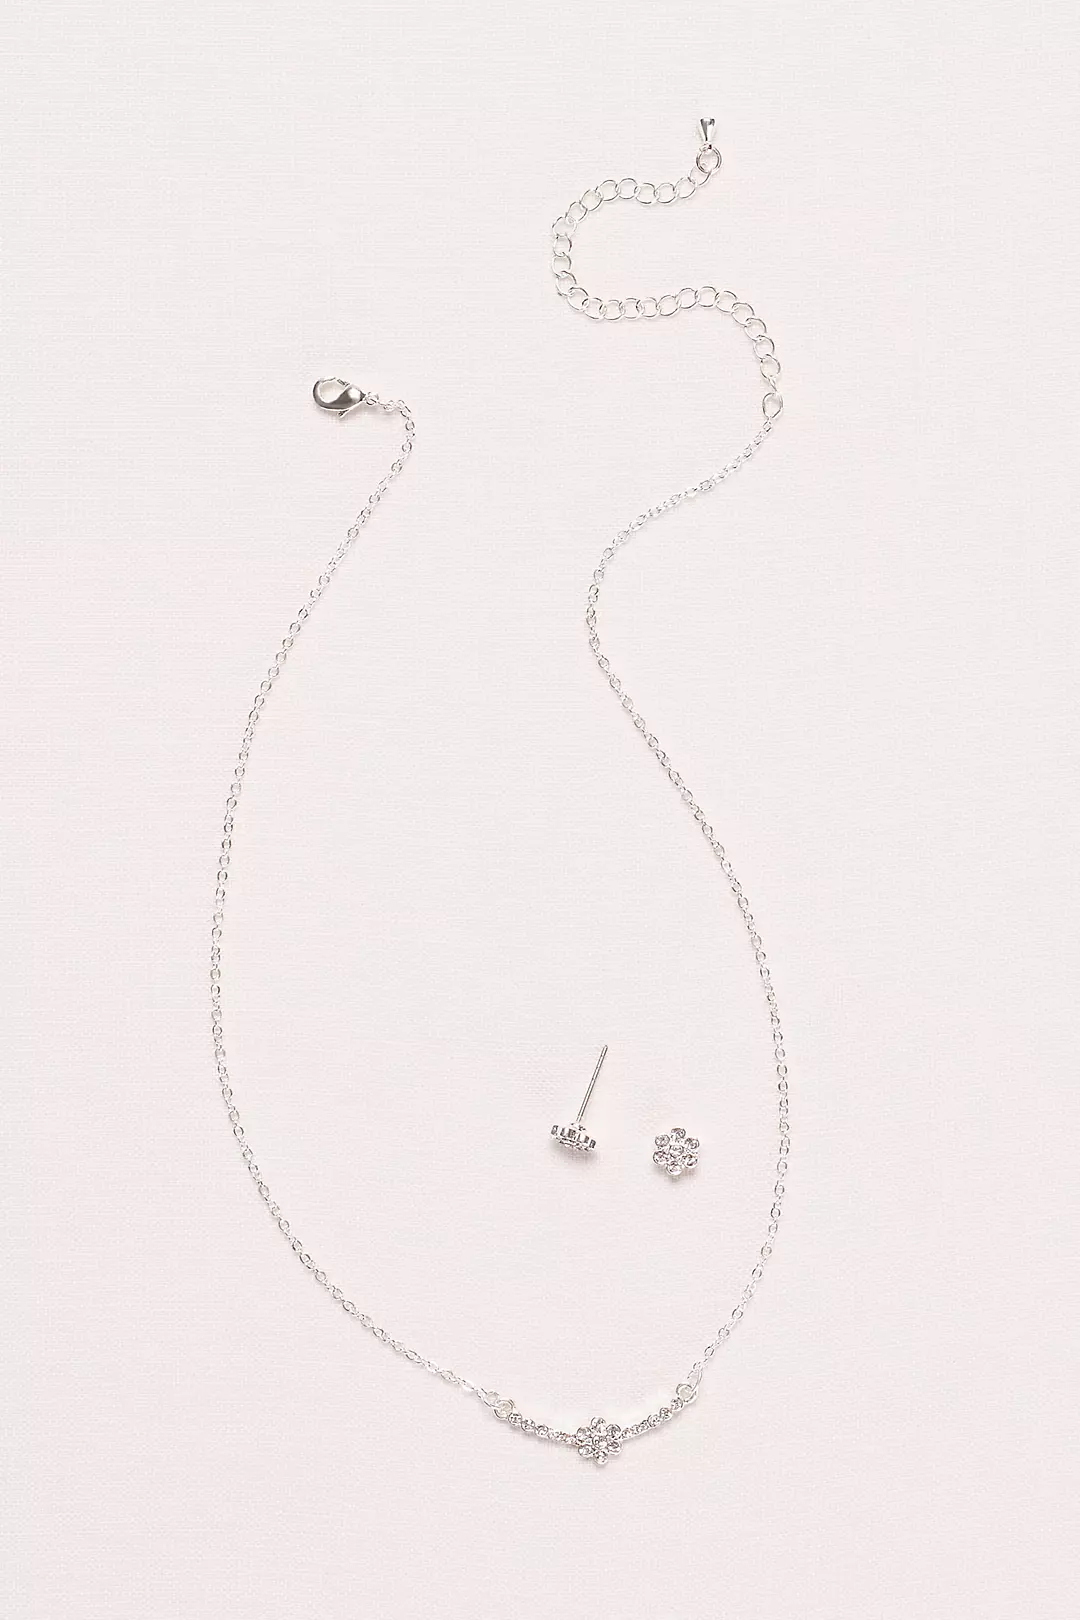 Flower Girl Crystal Necklace and Earring Set Image